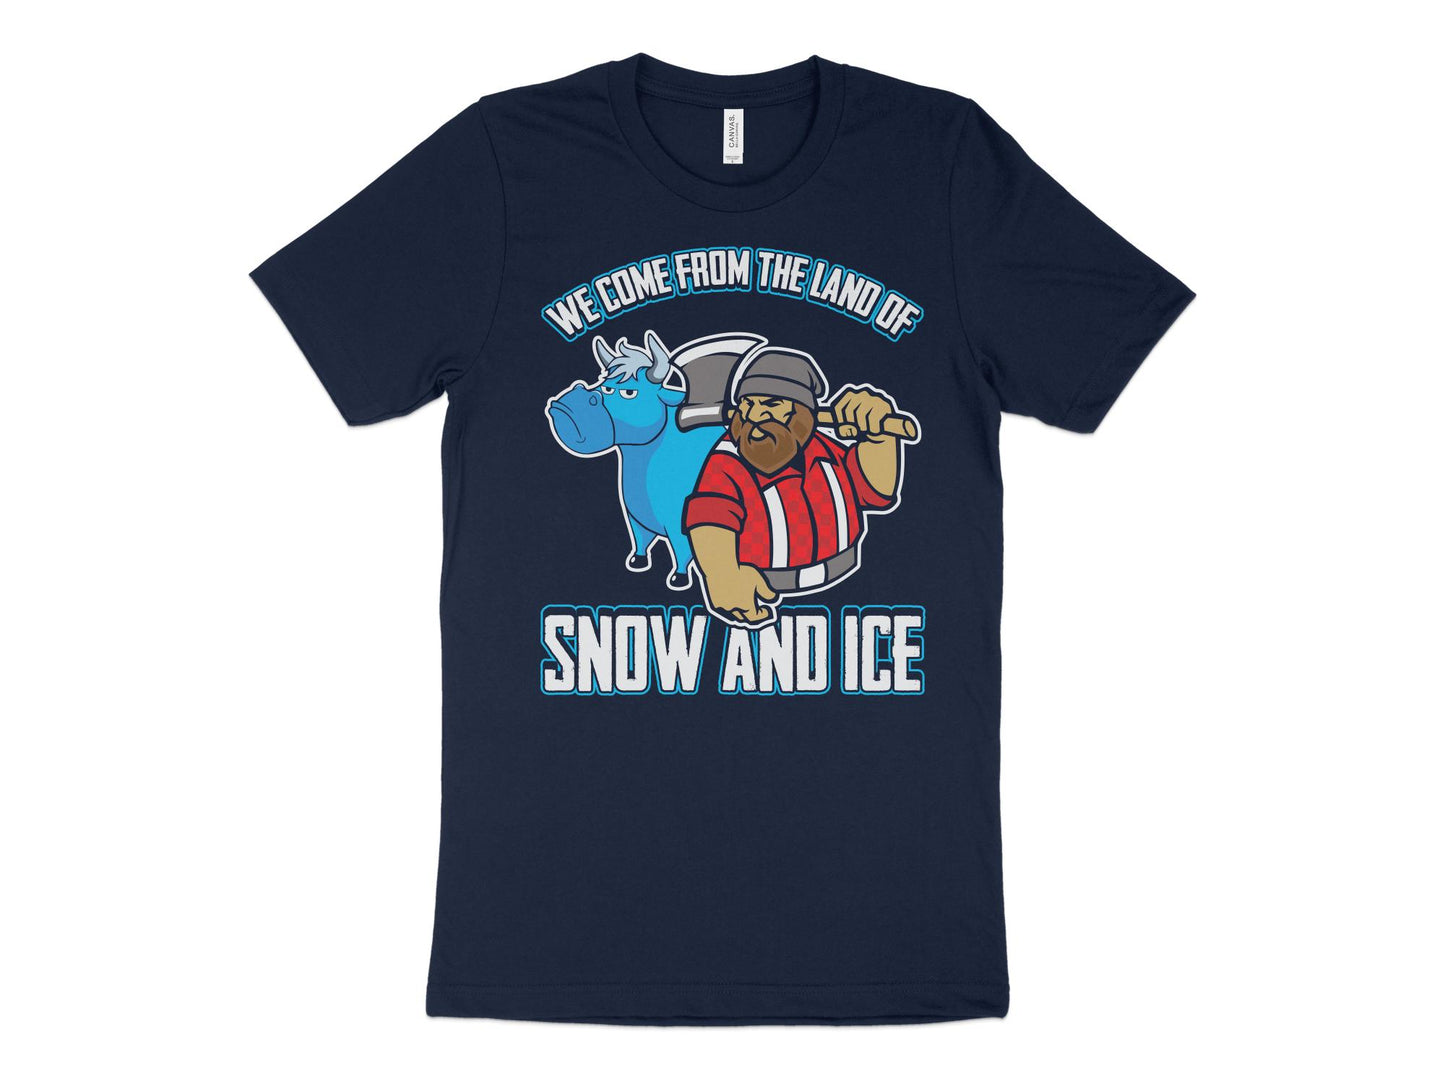 Minnesota T Shirt Land of Snow and Ice navy blue